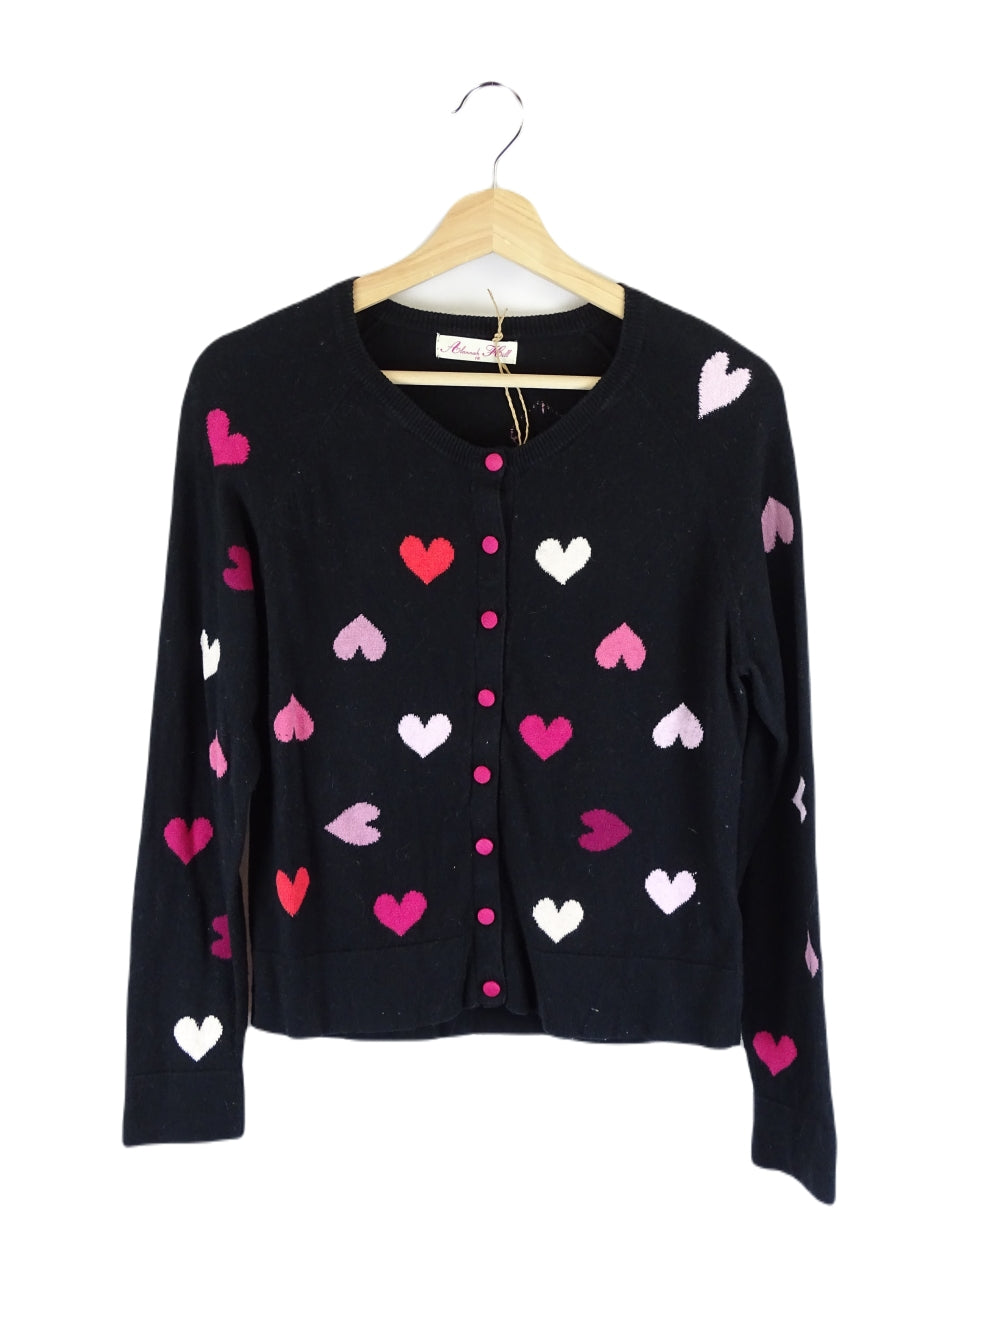 Alannah Hill Black And Pink Love Heart Cardigan 16